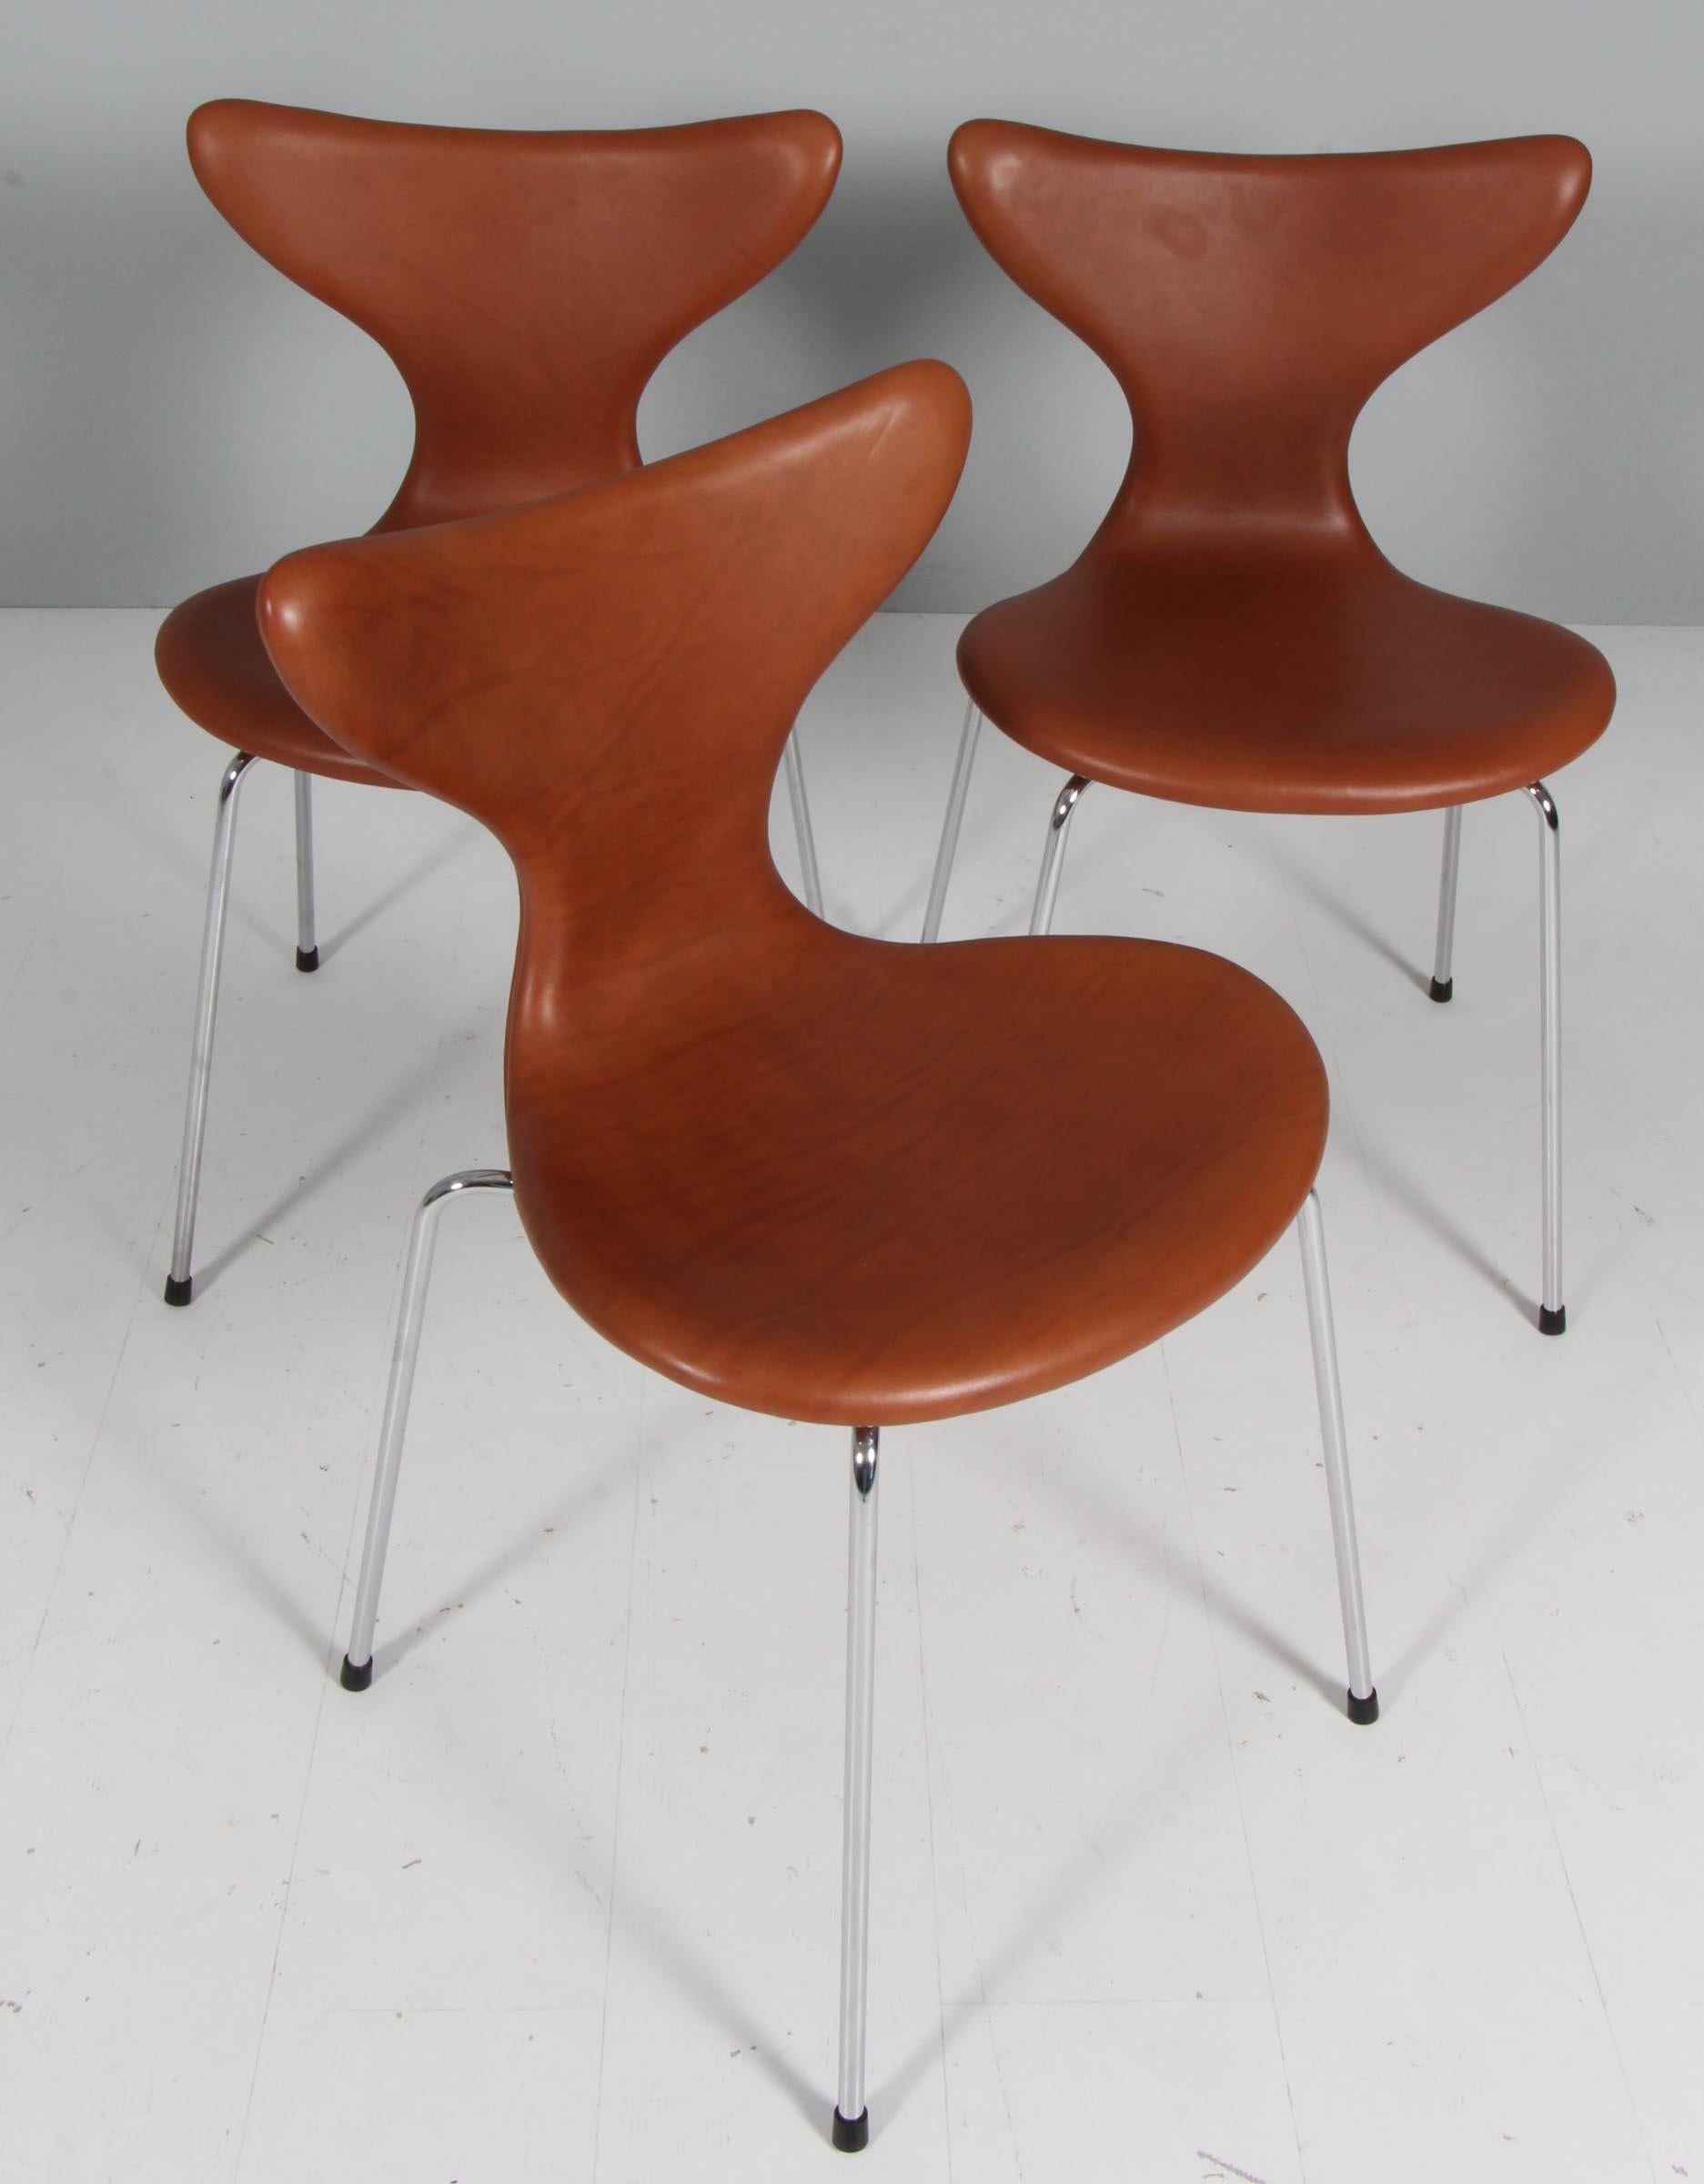 Arne Jacobsen dining chair new upholstered with smooth brandy aniline leather.

Base of  chromed steel tube.

Model 3108 Seagull, made by Fritz Hansen.